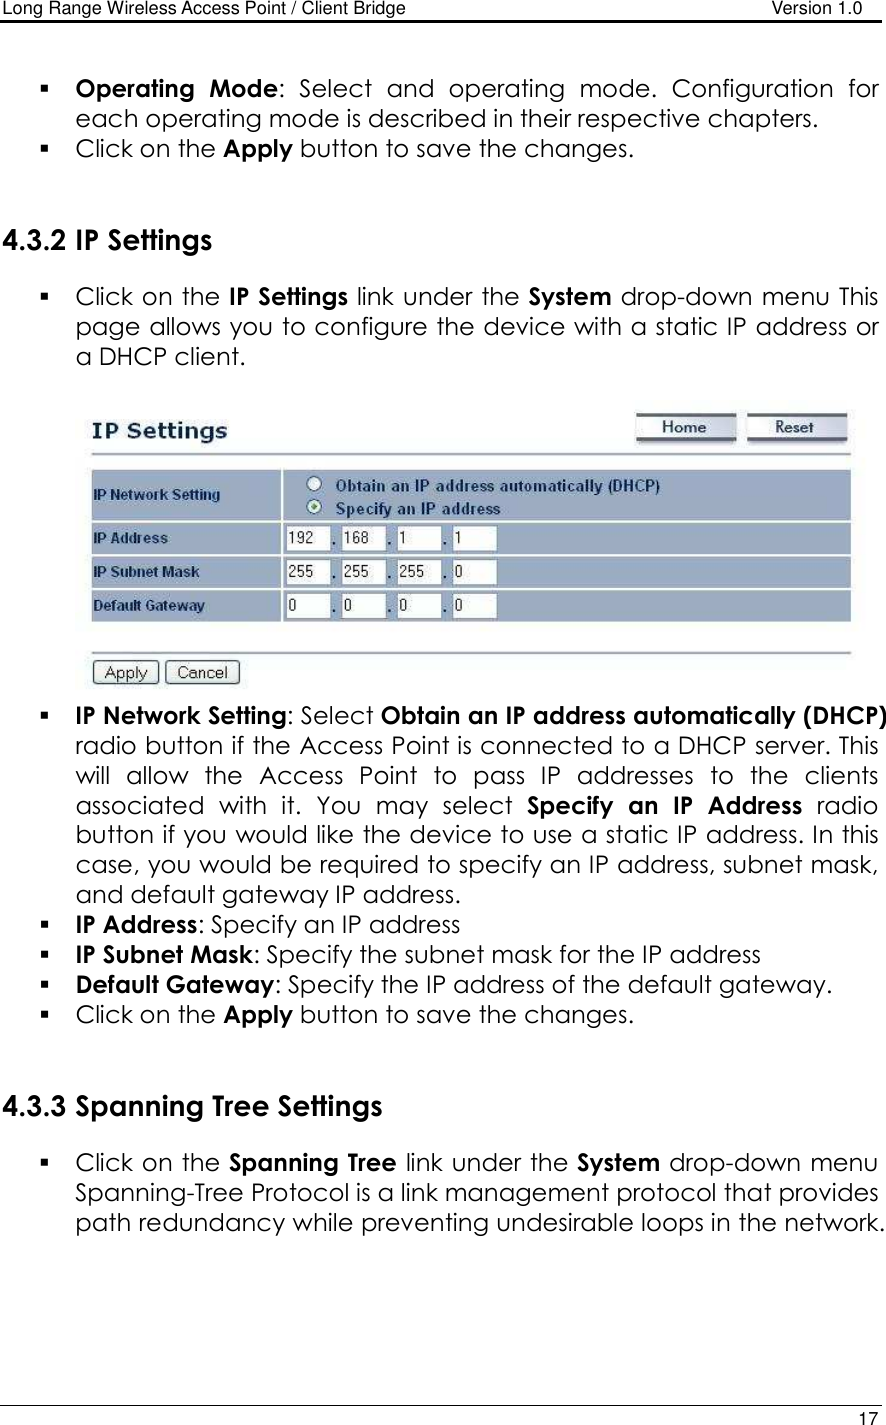 Long Range Wireless Access Point / Client Bridge                                   Version 1.0    17   Operating  Mode:  Select  and  operating  mode.  Configuration  for each operating mode is described in their respective chapters.   Click on the Apply button to save the changes.    4.3.2 IP Settings  Click on the IP Settings link under the System drop-down menu This page allows you to configure the device with a static IP address or a DHCP client.      IP Network Setting: Select Obtain an IP address automatically (DHCP) radio button if the Access Point is connected to a DHCP server. This will  allow  the  Access  Point  to  pass  IP  addresses  to  the  clients associated  with  it.  You  may  select  Specify  an  IP  Address  radio button if you would like the device to use a static IP address. In this case, you would be required to specify an IP address, subnet mask, and default gateway IP address.  IP Address: Specify an IP address  IP Subnet Mask: Specify the subnet mask for the IP address  Default Gateway: Specify the IP address of the default gateway.  Click on the Apply button to save the changes.    4.3.3 Spanning Tree Settings  Click on the Spanning Tree link under the System drop-down menu Spanning-Tree Protocol is a link management protocol that provides path redundancy while preventing undesirable loops in the network.  